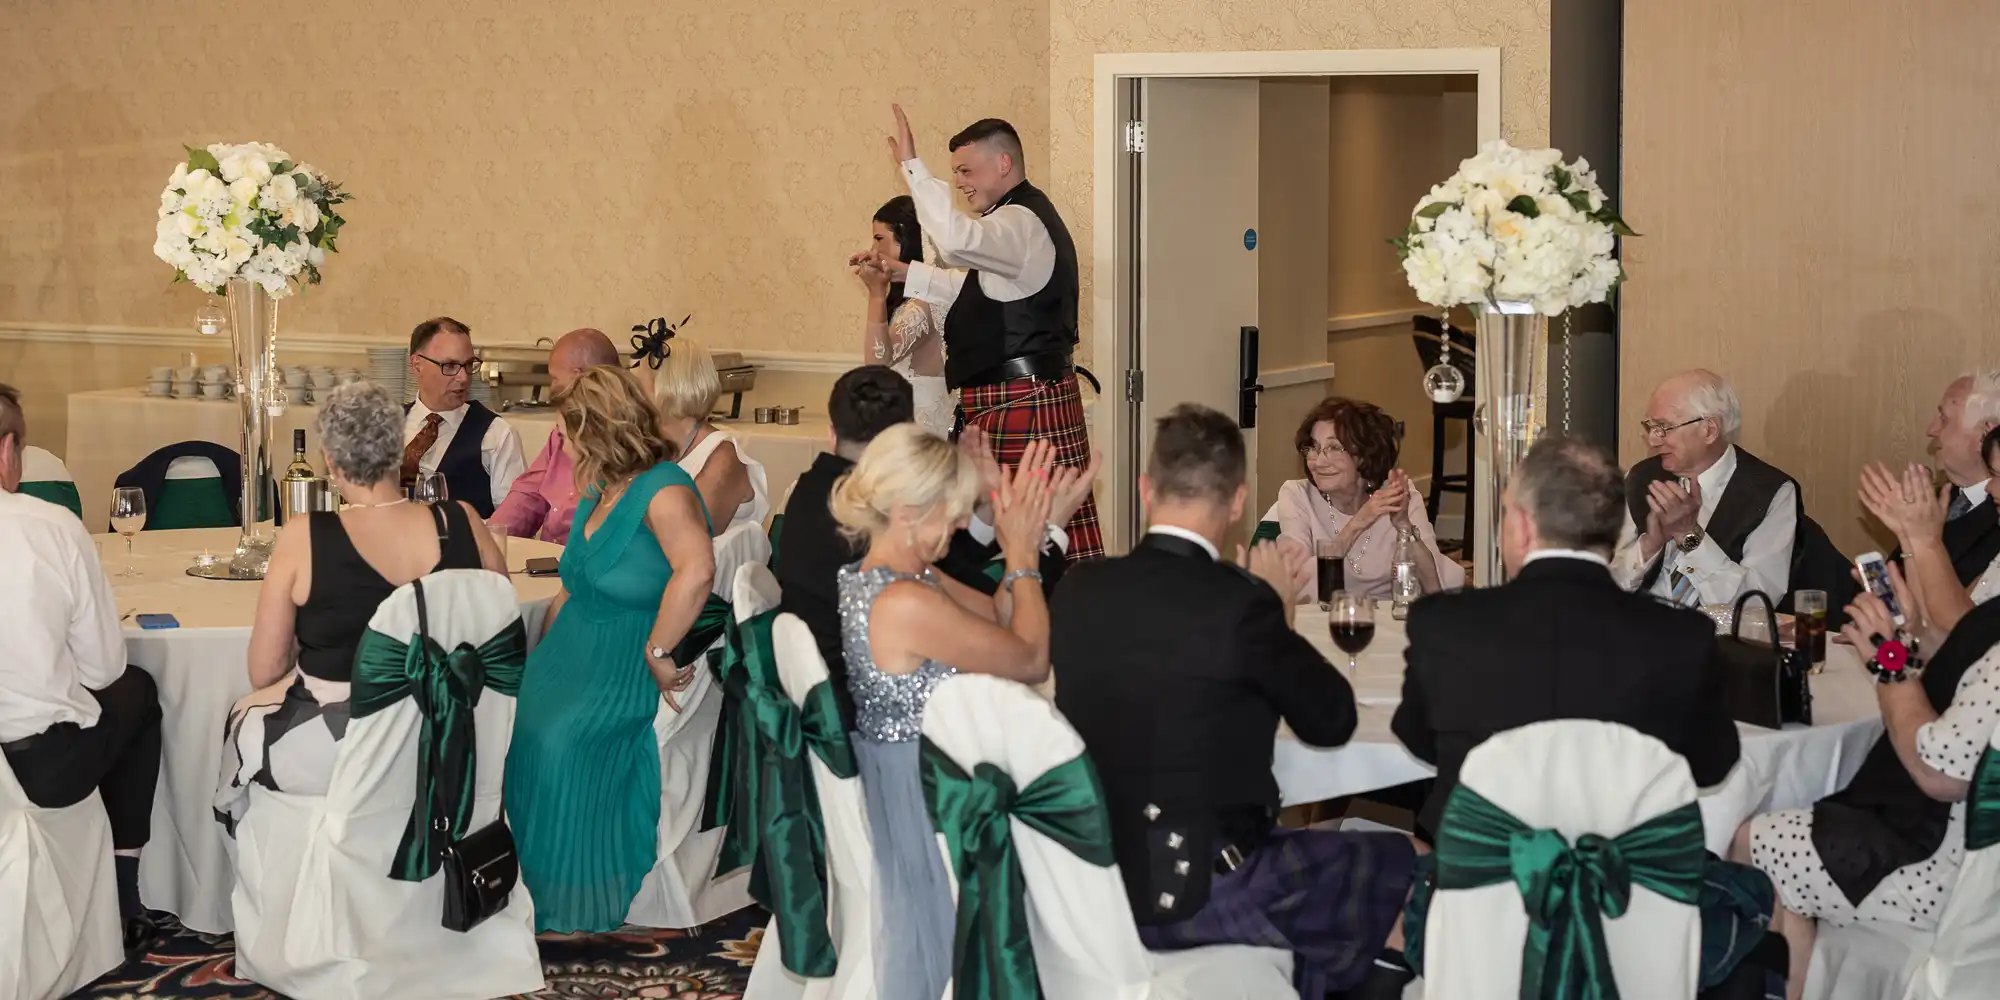 A man in a kilt is giving a speech at a wedding reception, receiving applause from guests seated at decorated tables.